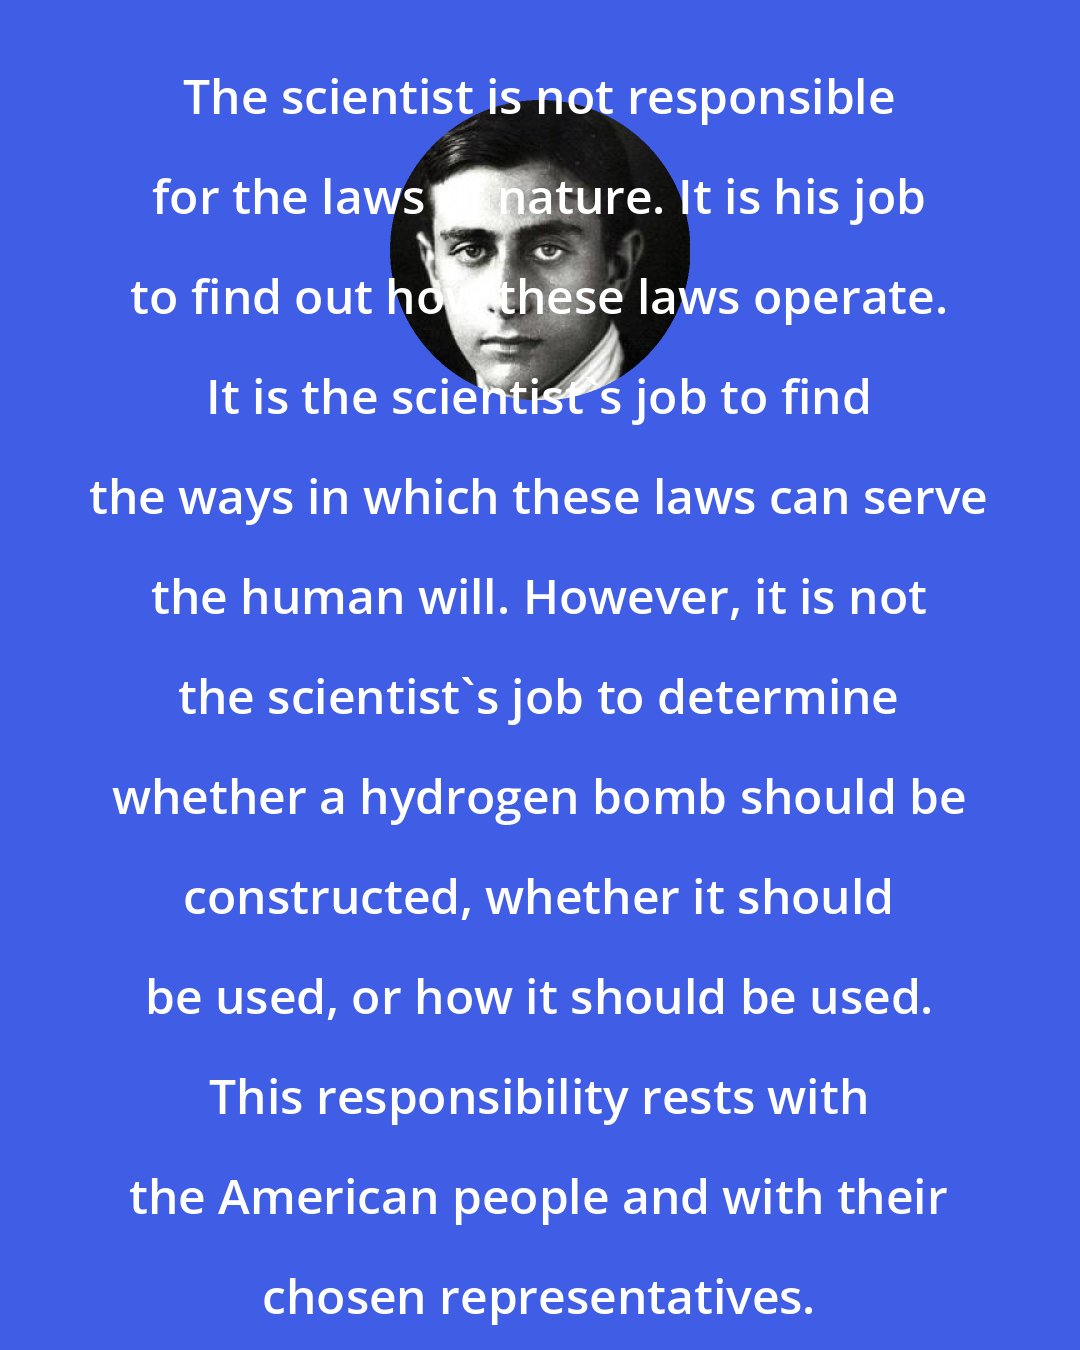 Edward Teller: The scientist is not responsible for the laws of nature. It is his job to find out how these laws operate. It is the scientist's job to find the ways in which these laws can serve the human will. However, it is not the scientist's job to determine whether a hydrogen bomb should be constructed, whether it should be used, or how it should be used. This responsibility rests with the American people and with their chosen representatives.